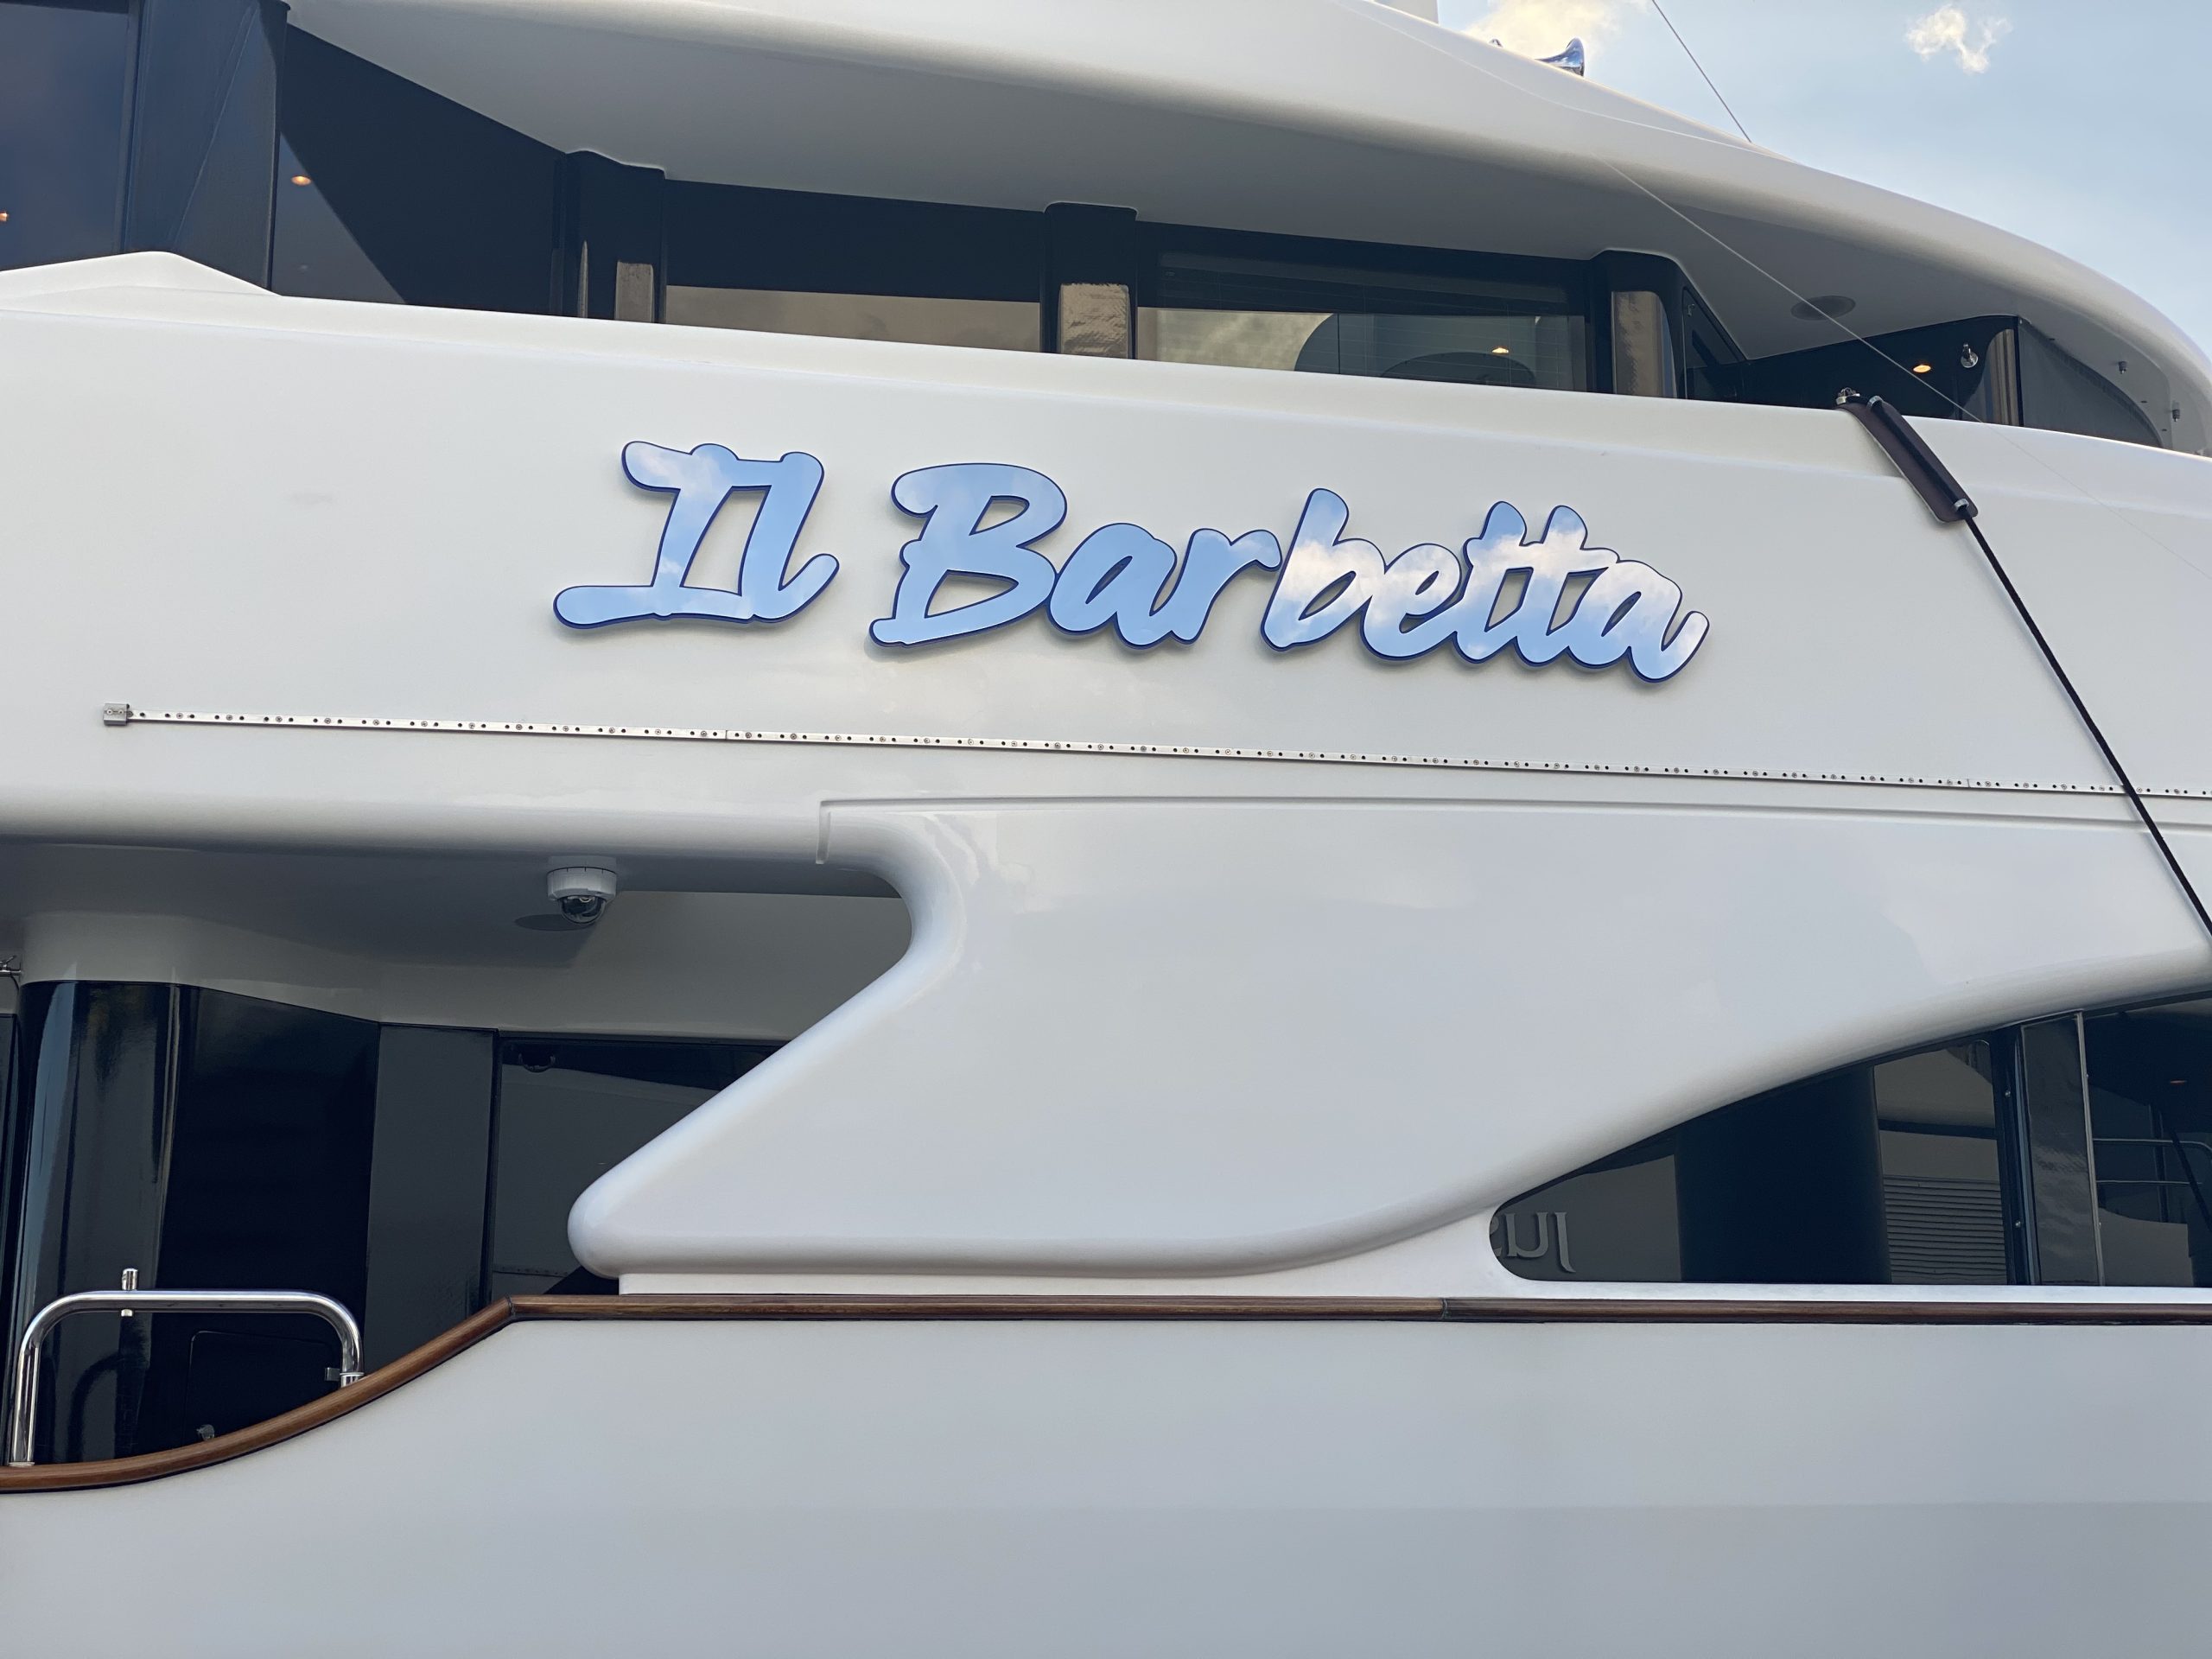 Yacht Signs For Mega Yacht Il Barbetta